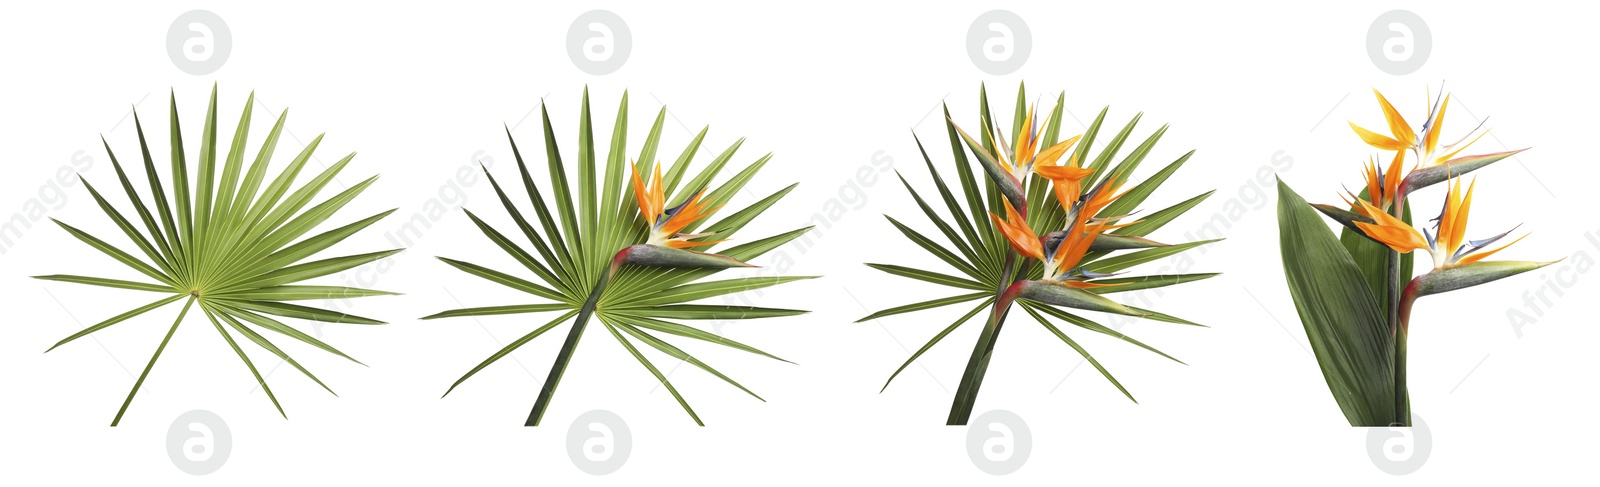 Image of Set with beautiful Bird of Paradise tropical flowers and green leaves on white background. Banner design